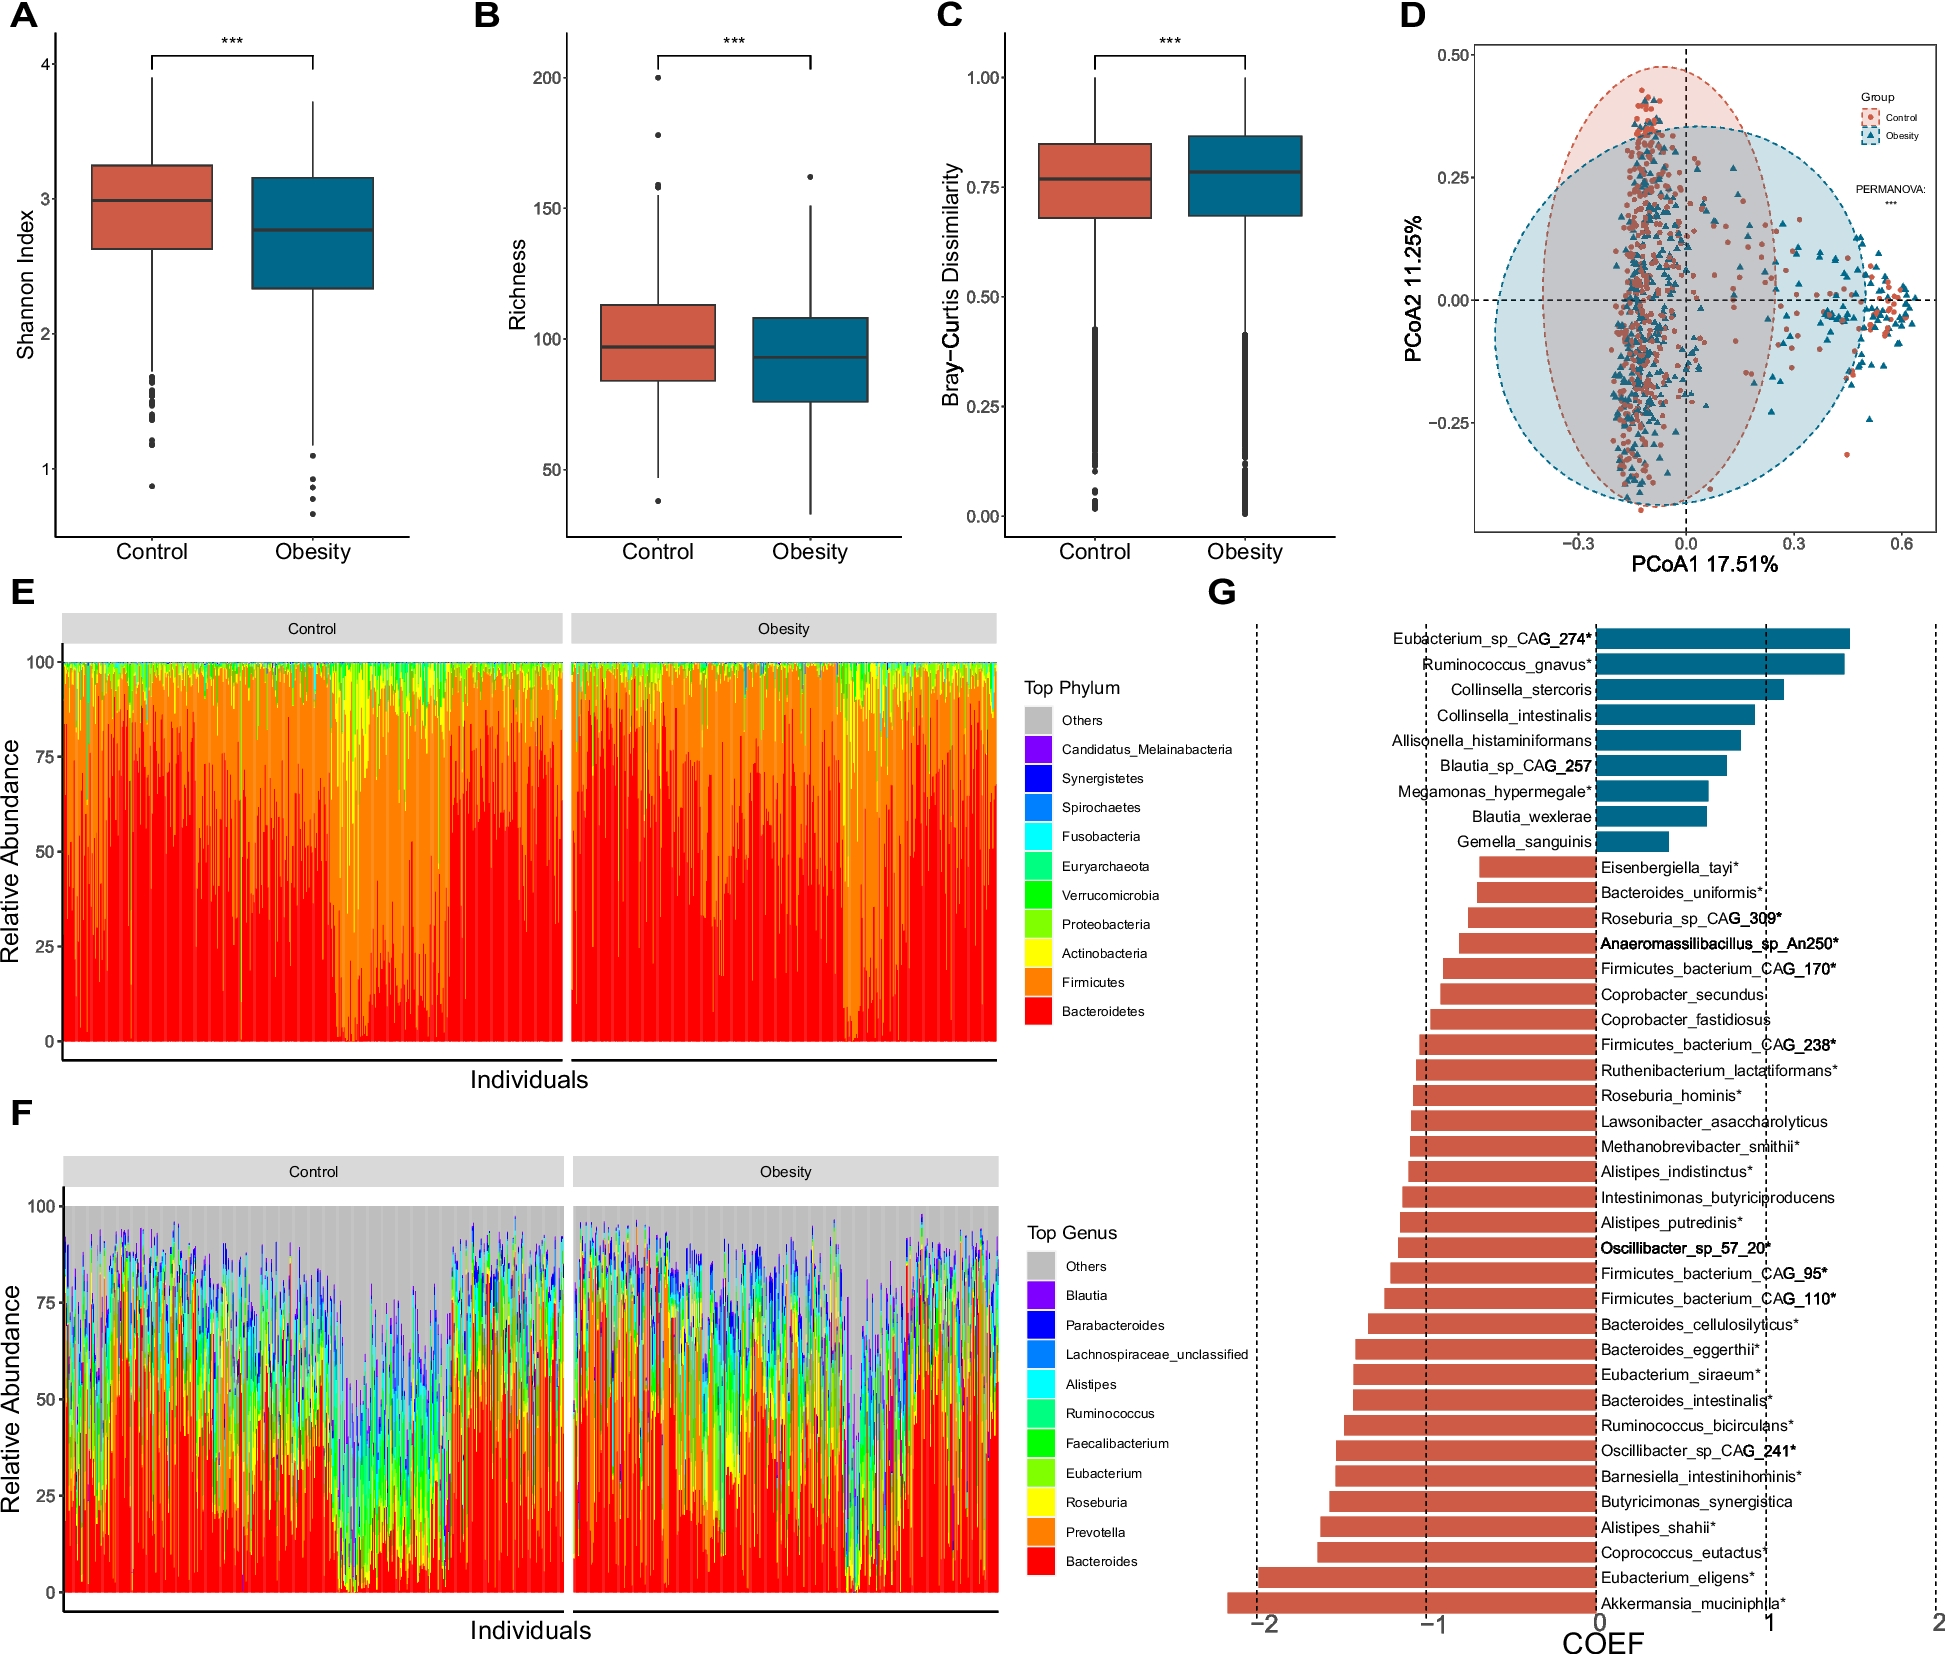 Integrative metagenomic analysis reveals distinct gut microbial signatures related to obesity